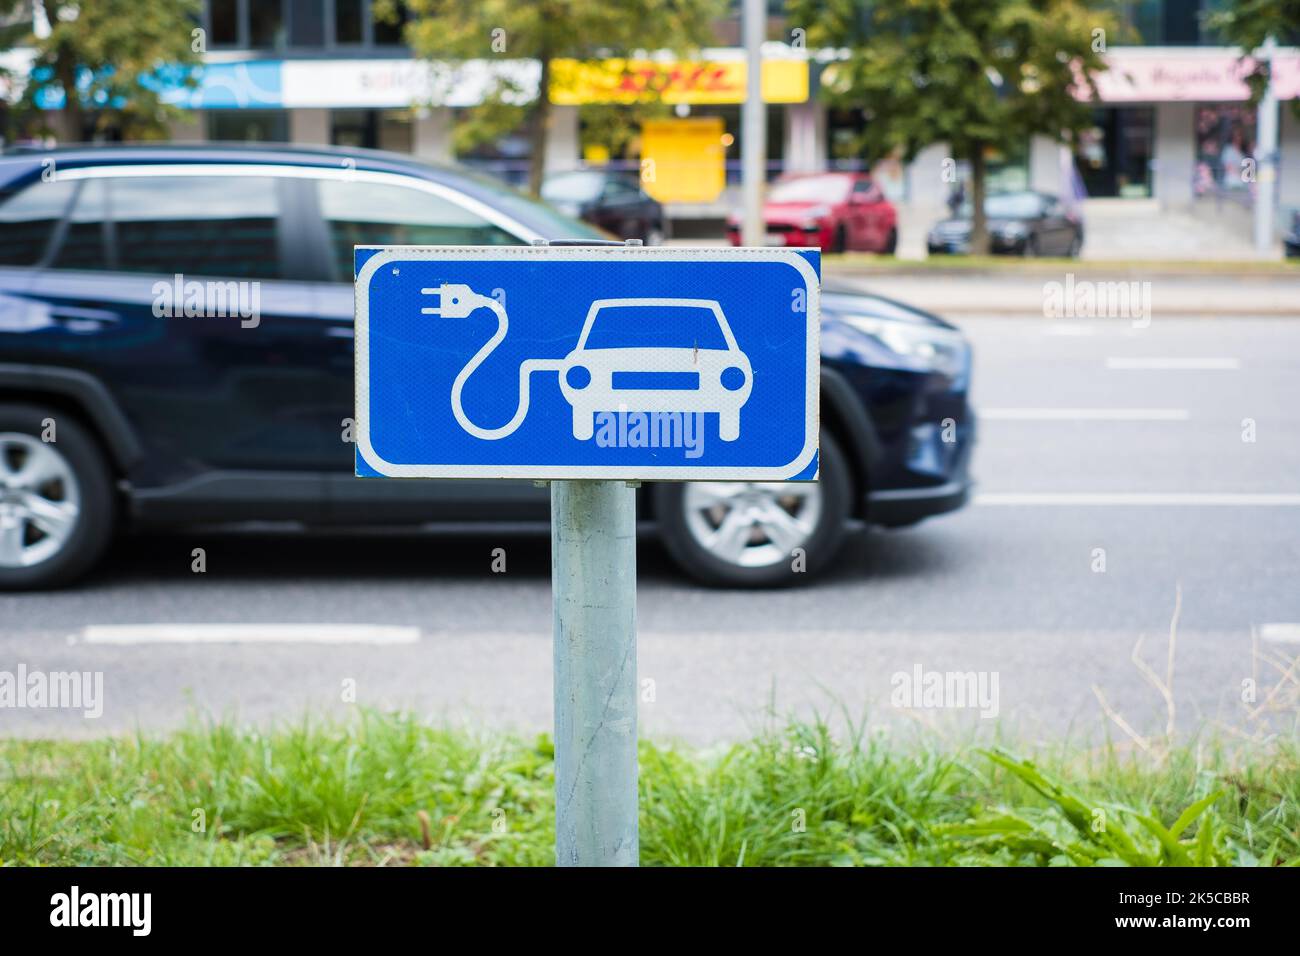 Public electrical vehicle charging point traffic sign. Stock Photo